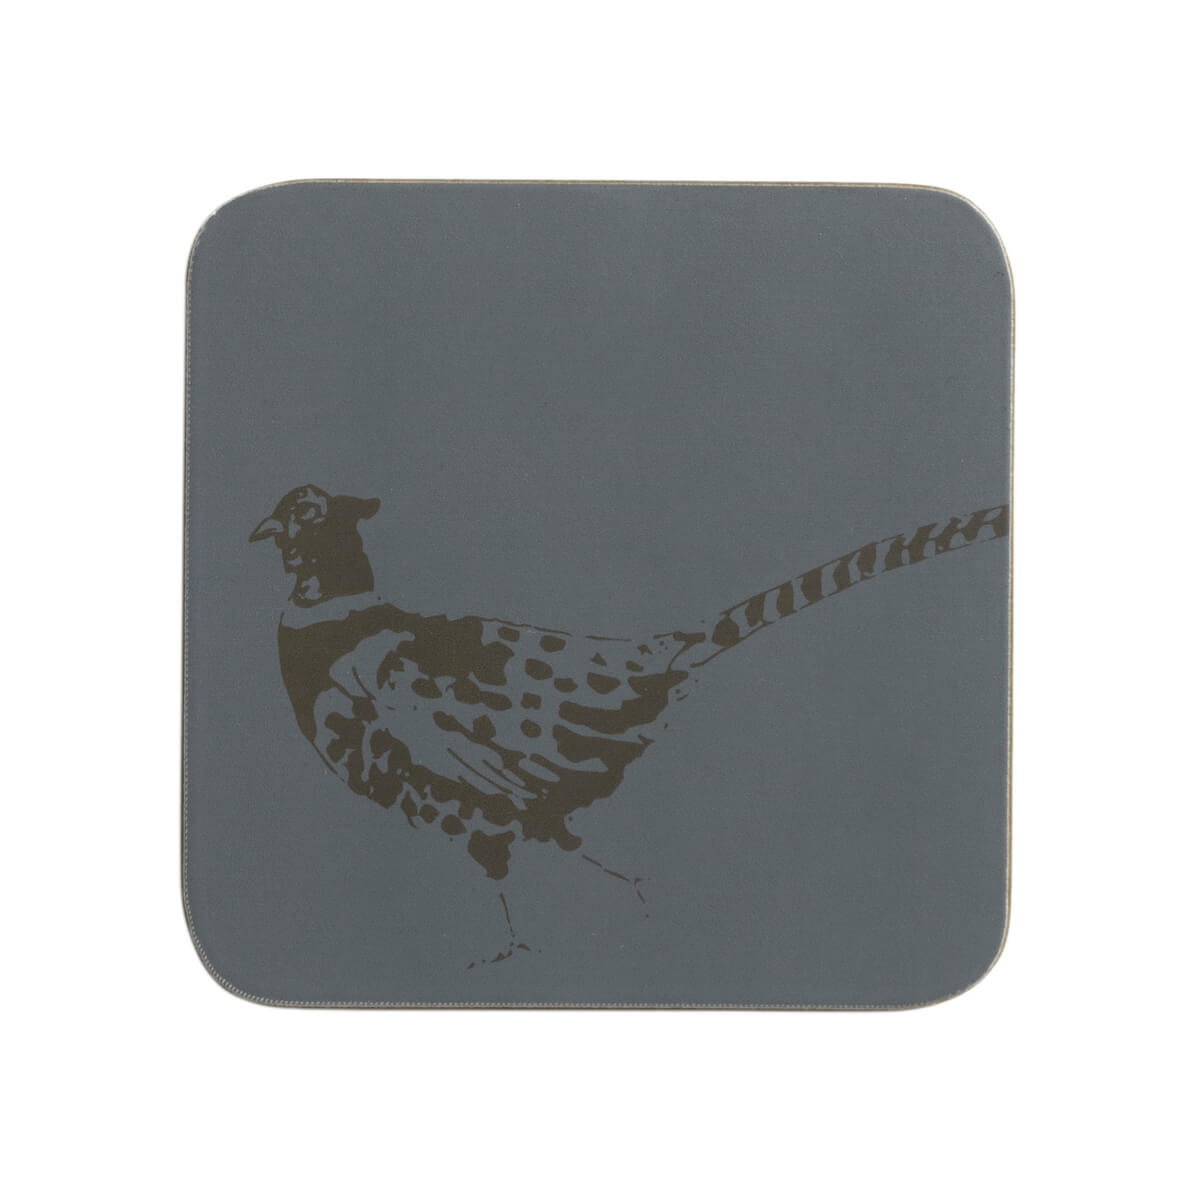 Pheasant Coasters (Set of 4) by Sophie Allport